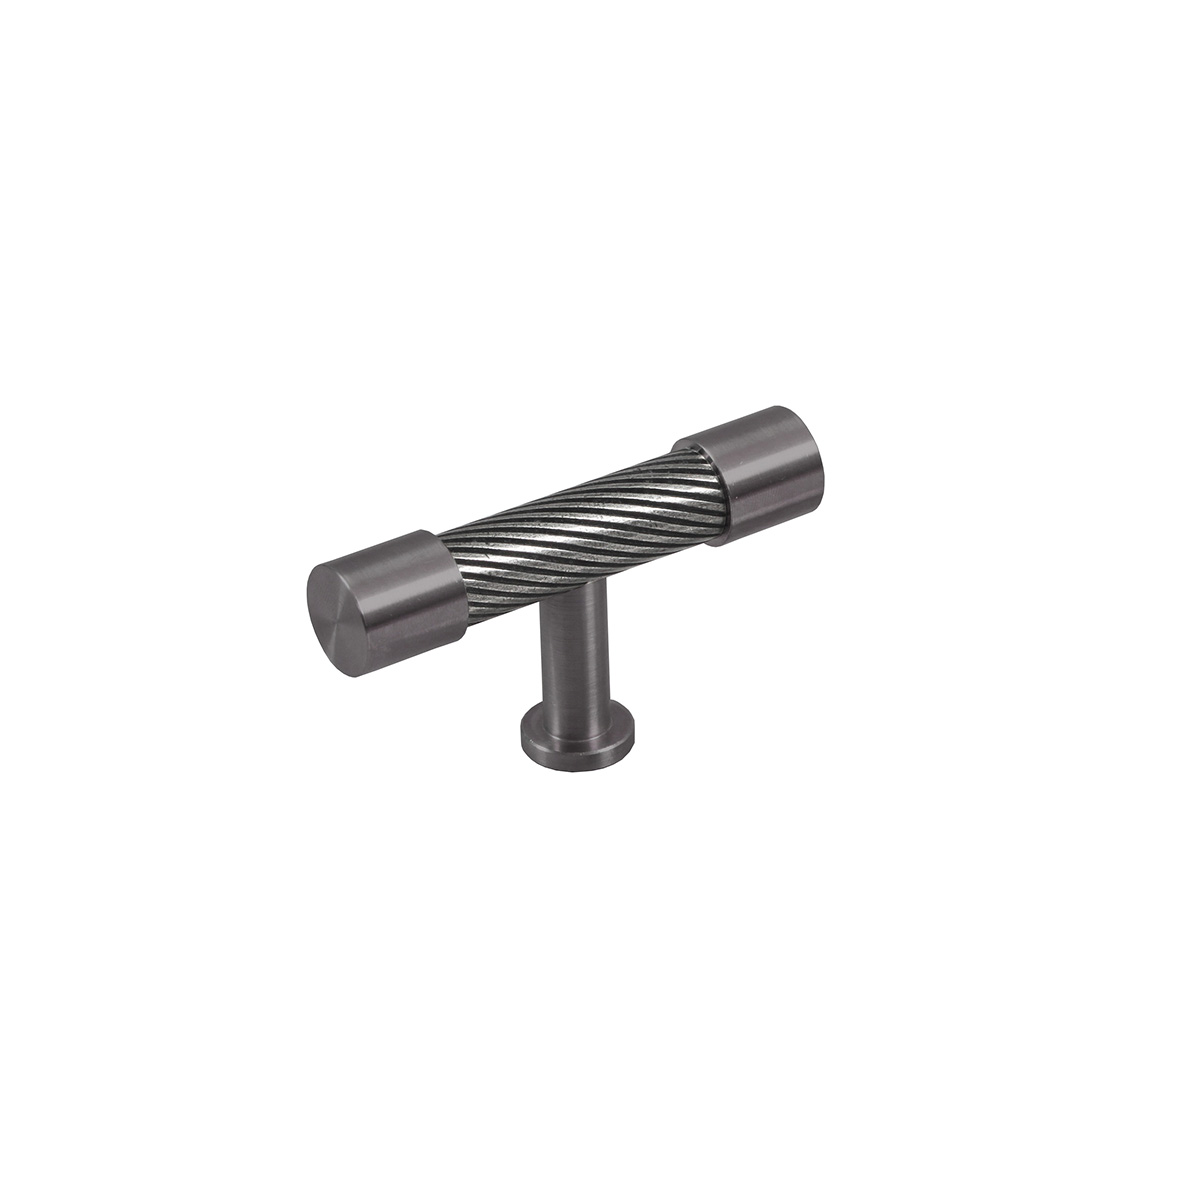 Immix Spiral T-Pull Handle - IMX3005-GR